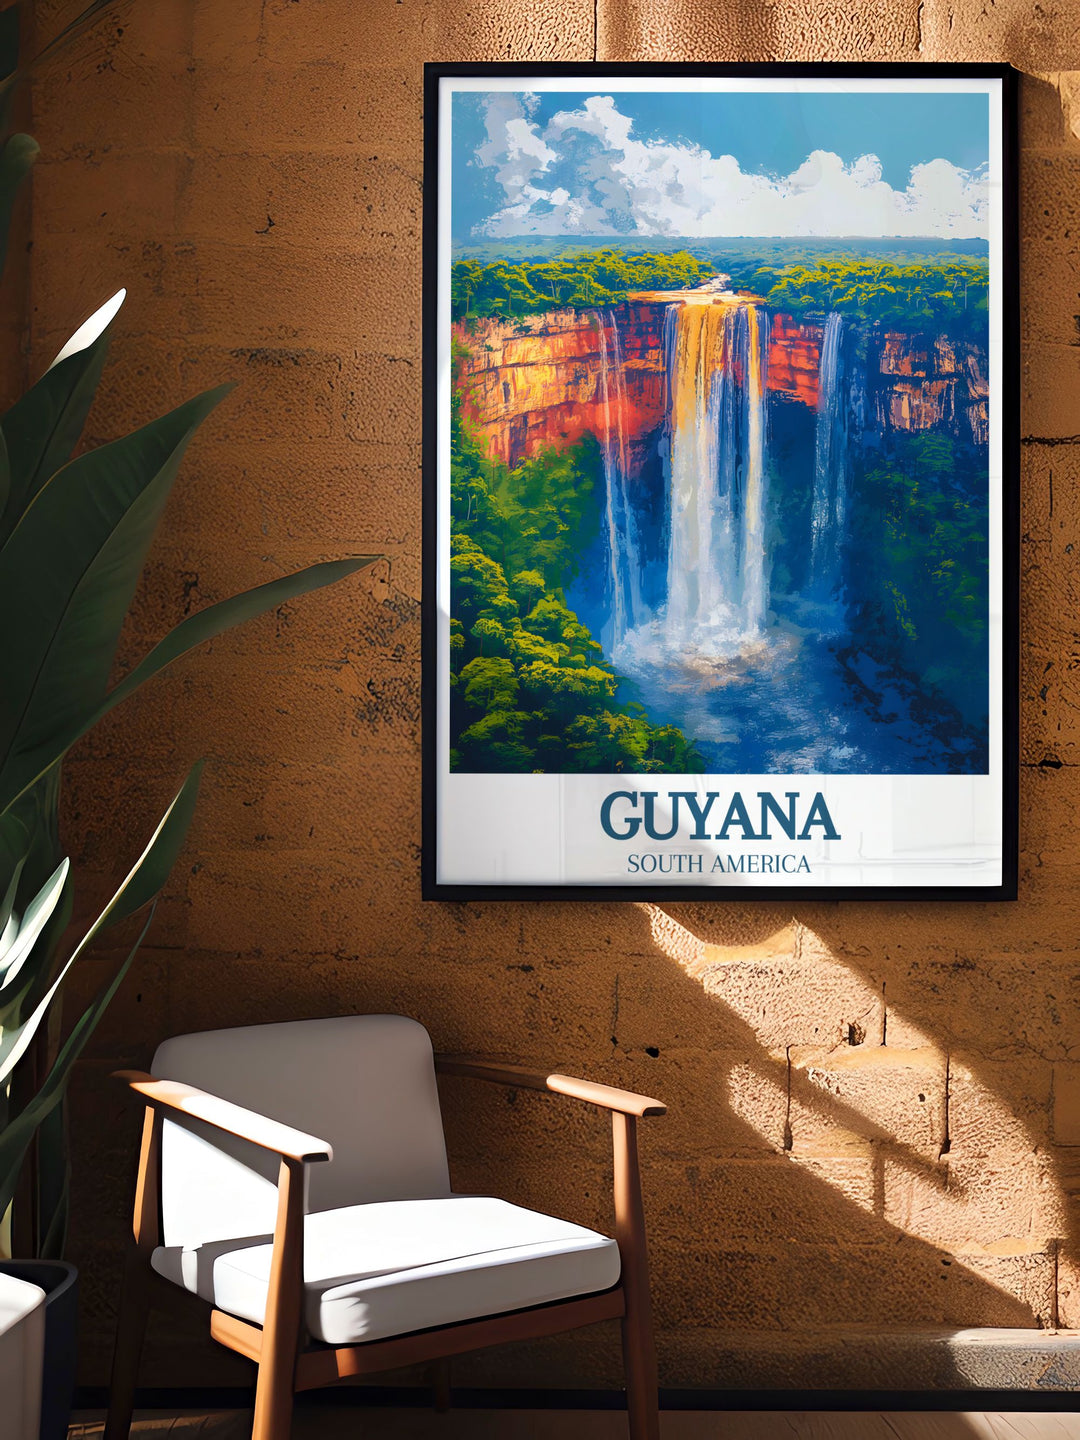 This travel poster features the vibrant rainforests and serene rivers of Guyana, offering a picturesque view of the countrys untouched natural beauty, perfect for enhancing your home decor.